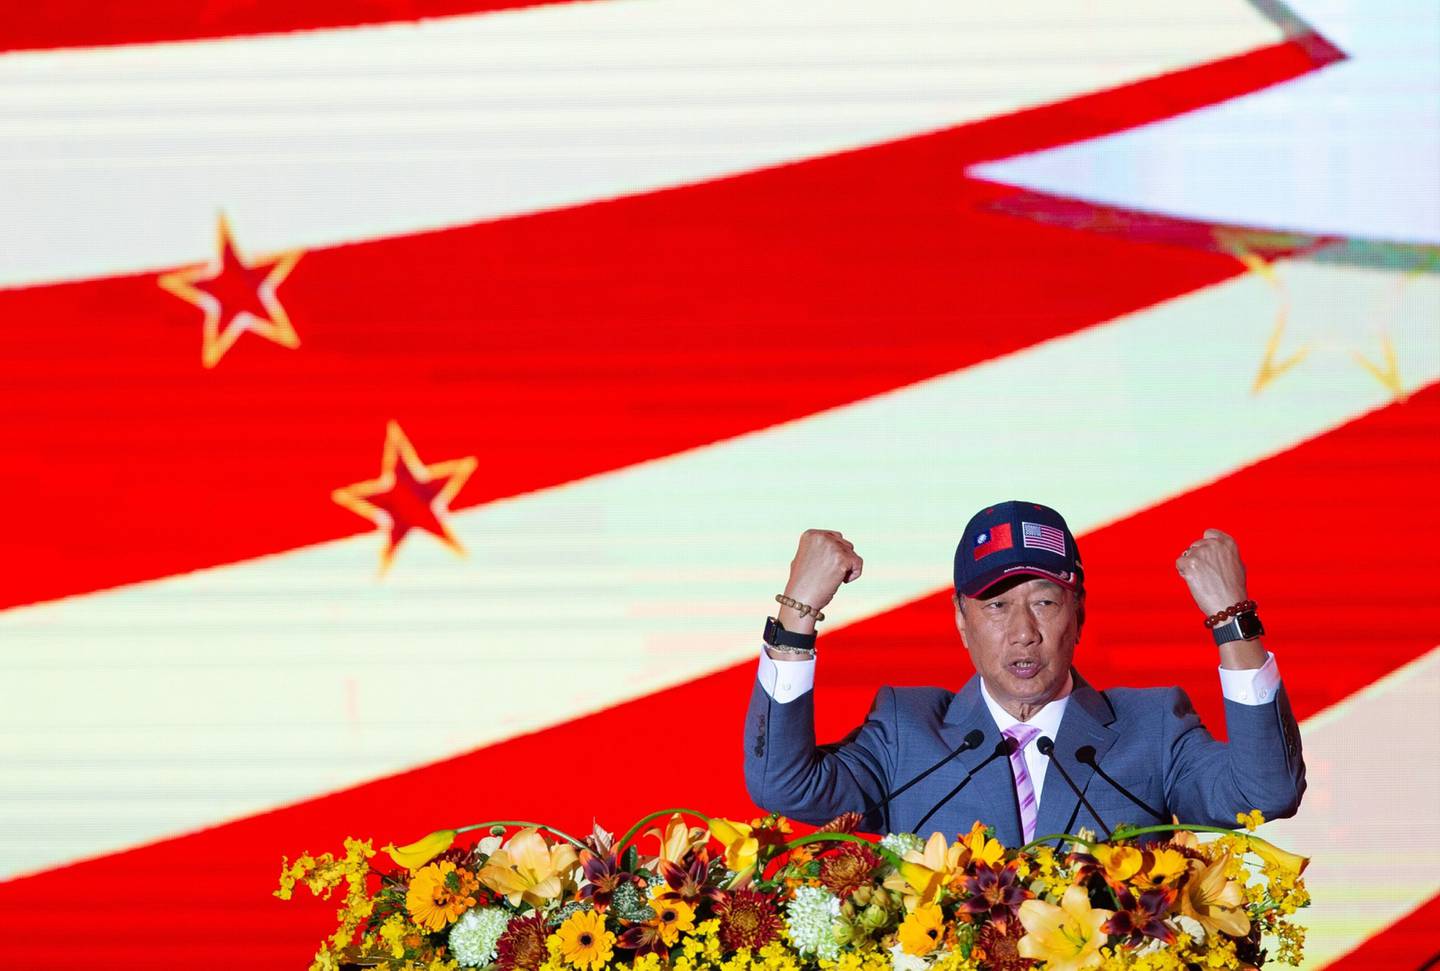 Terry Gou, founder of Foxconn Technology Group, gestures while speaking during a company event in Taipei, Taiwan.